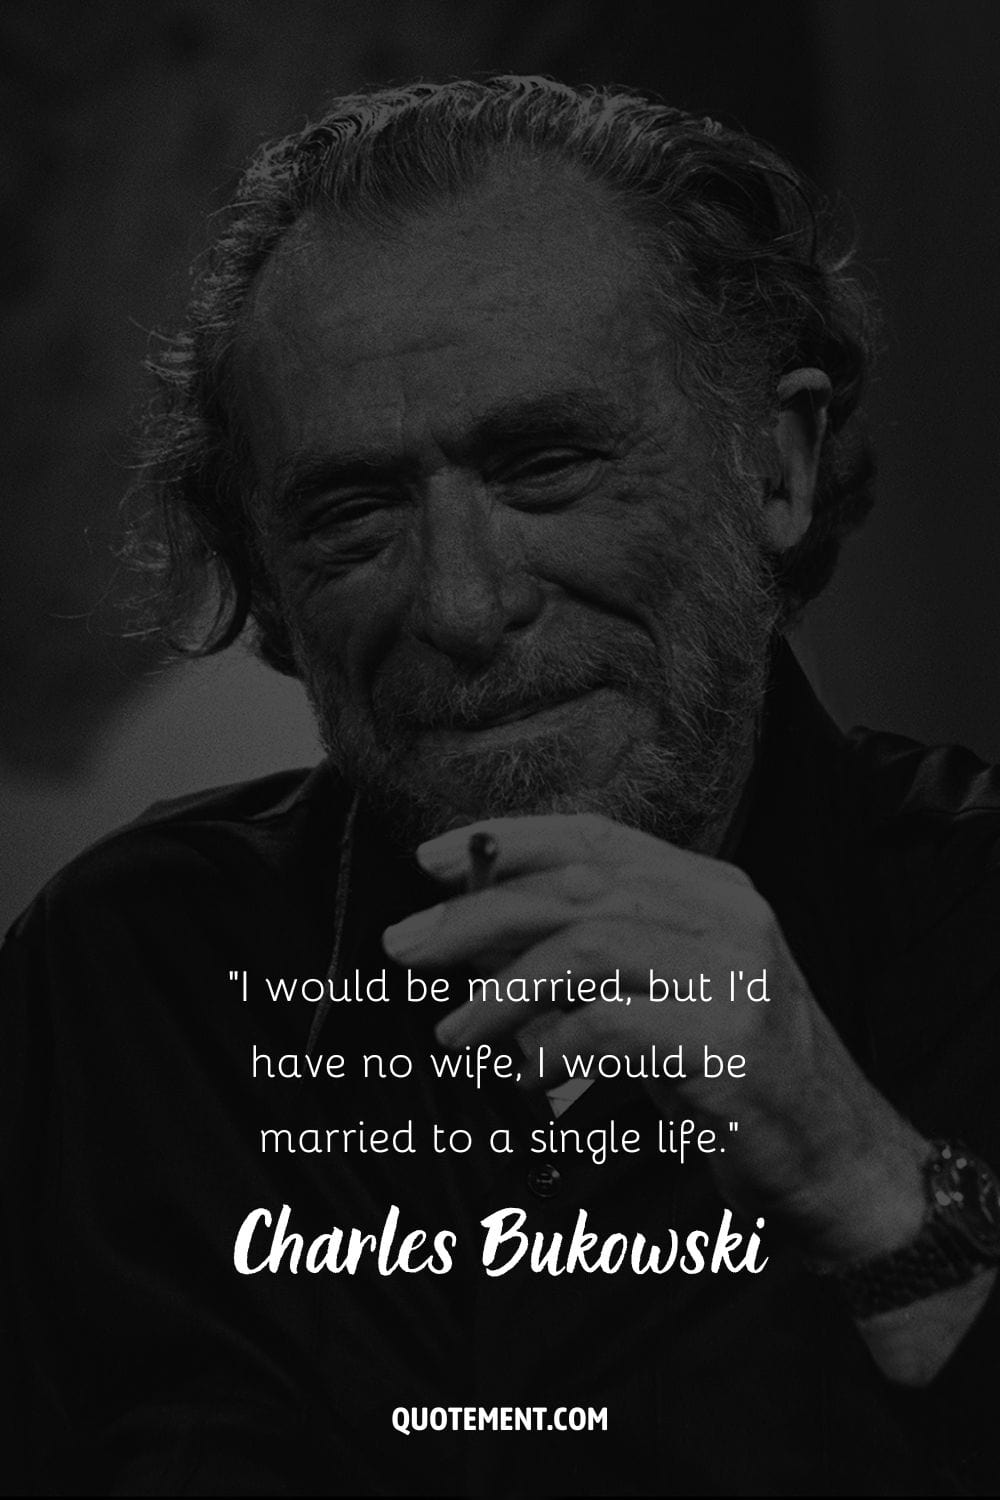 Bukowski holding a cigarette and smiling